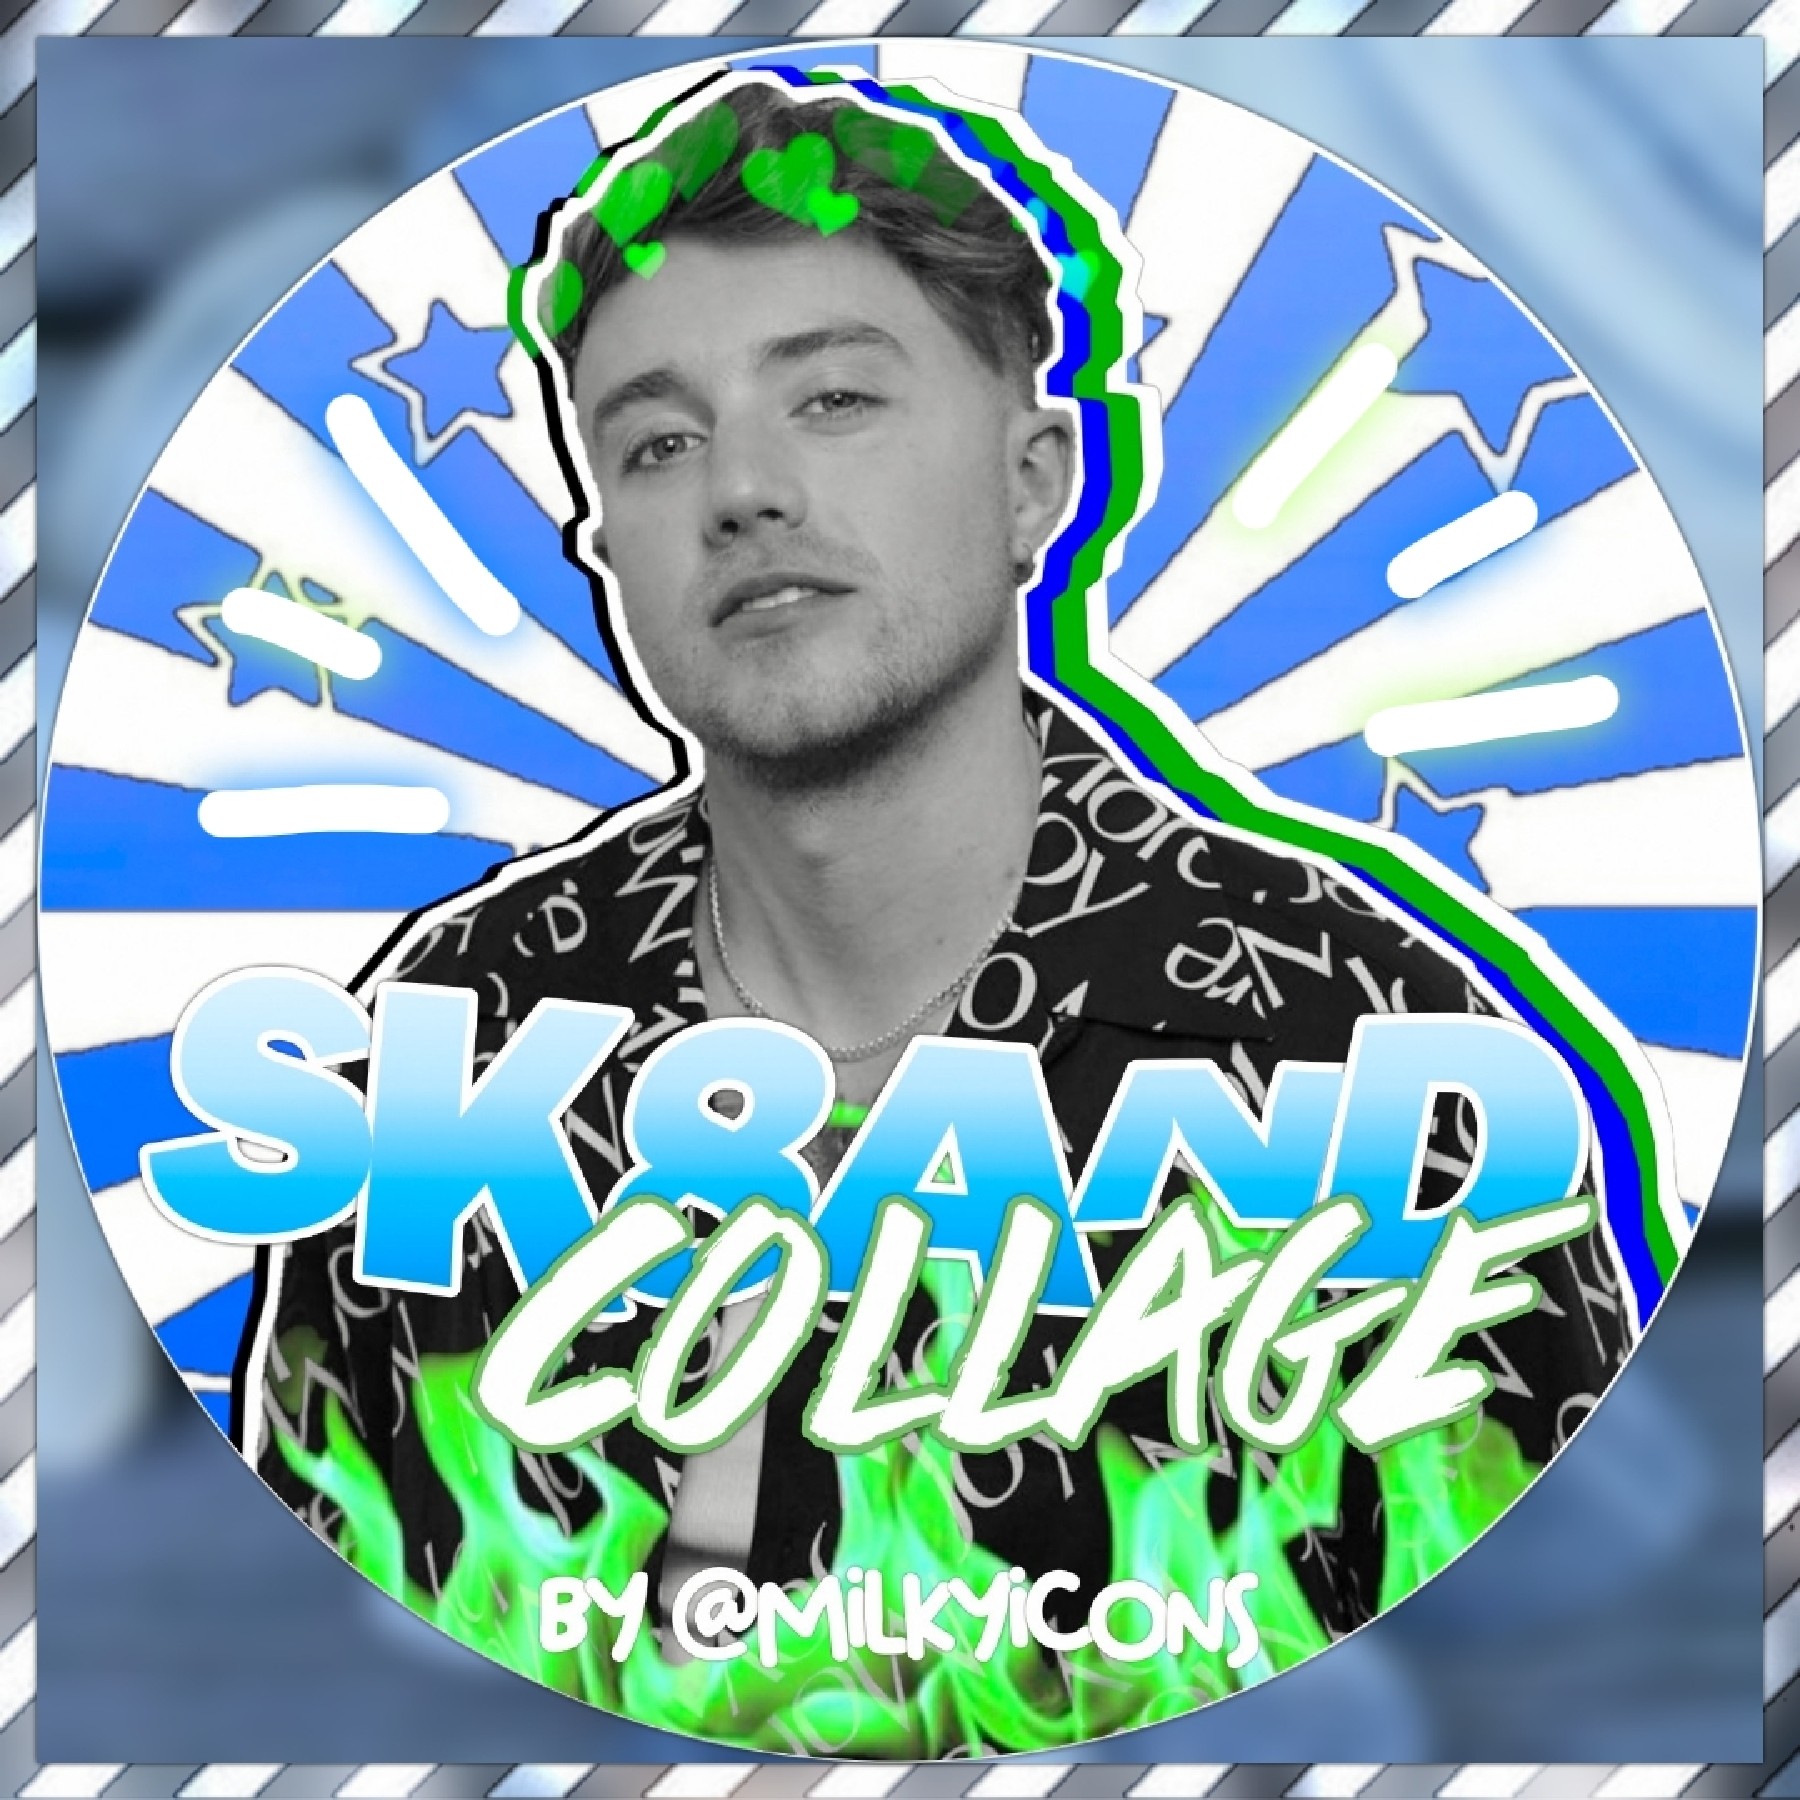 icon for: @Sk8andcollage
style: simple
color: green and blue💚💙
hope you like it! pls give creds if used💗